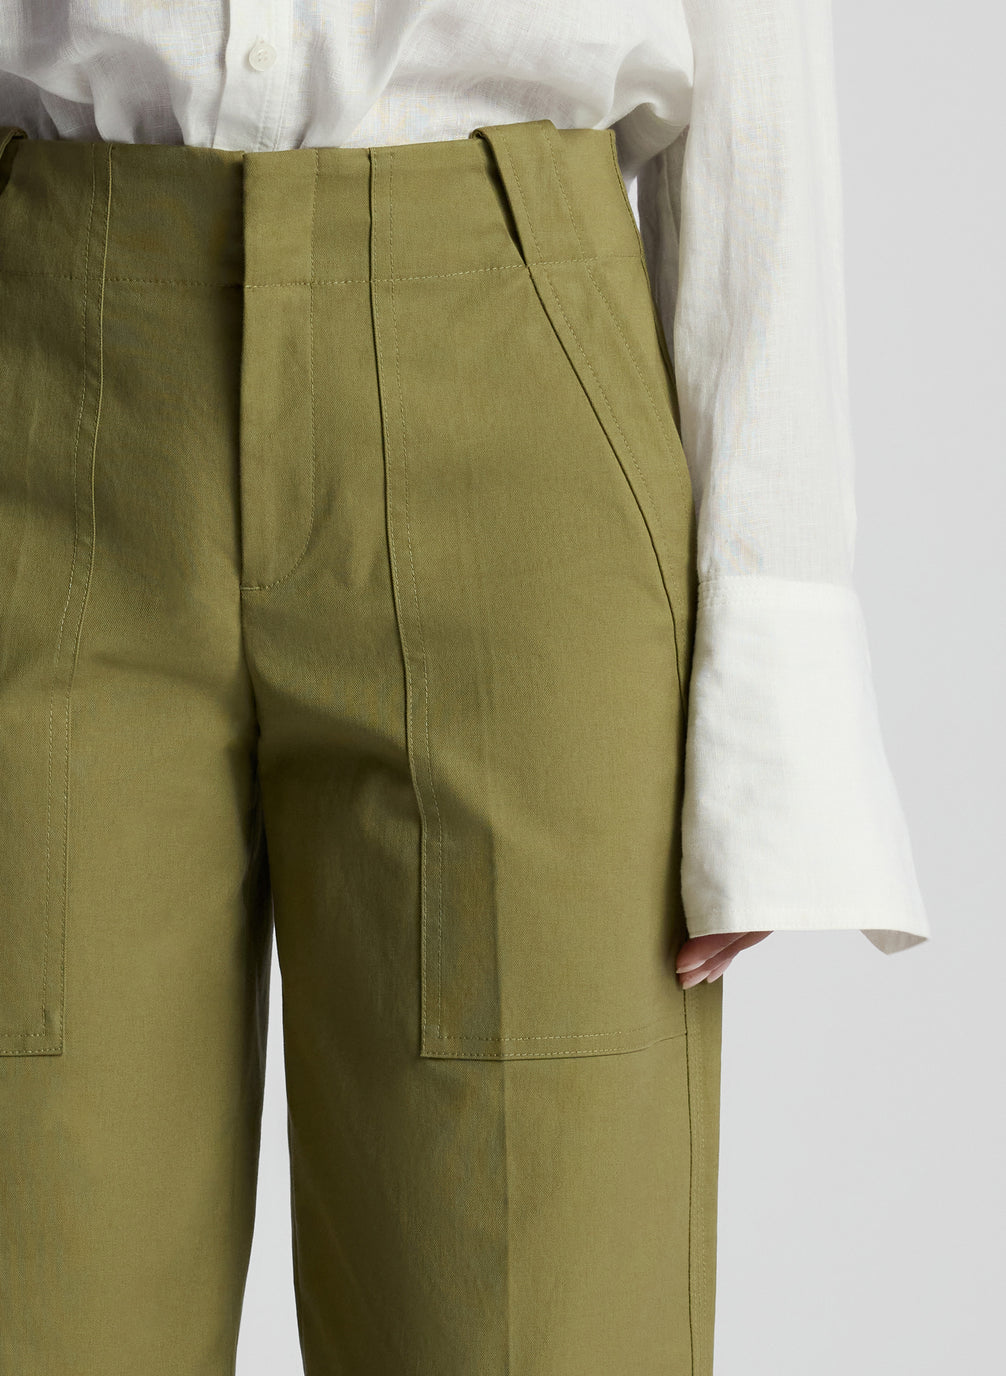 detail view of woman wearing white button down shirt and olive pants